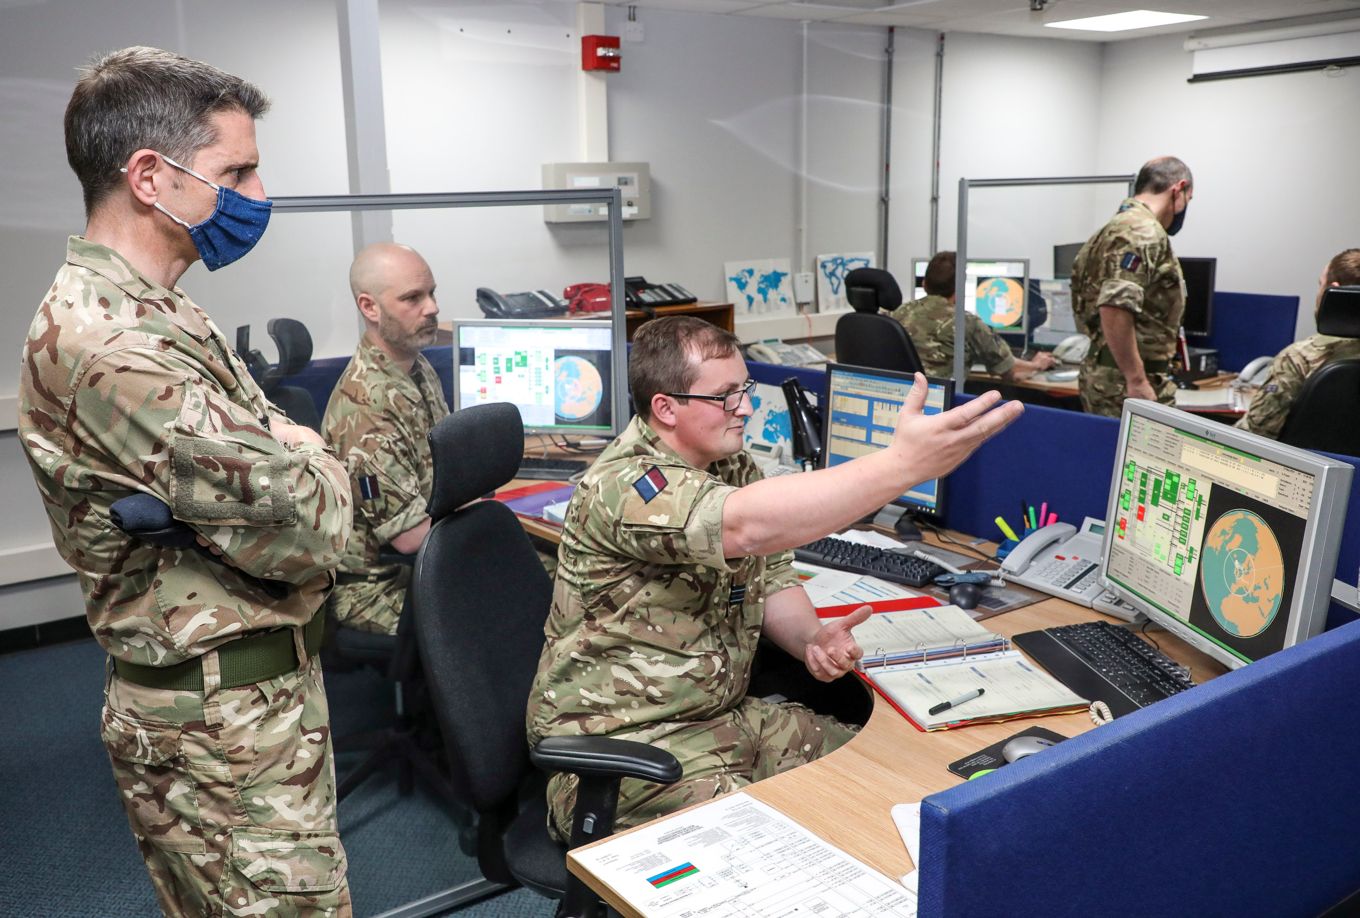 Air Vice-Marshal Godfrey and personnel in the office, with computer screens in the Space Operations Room.